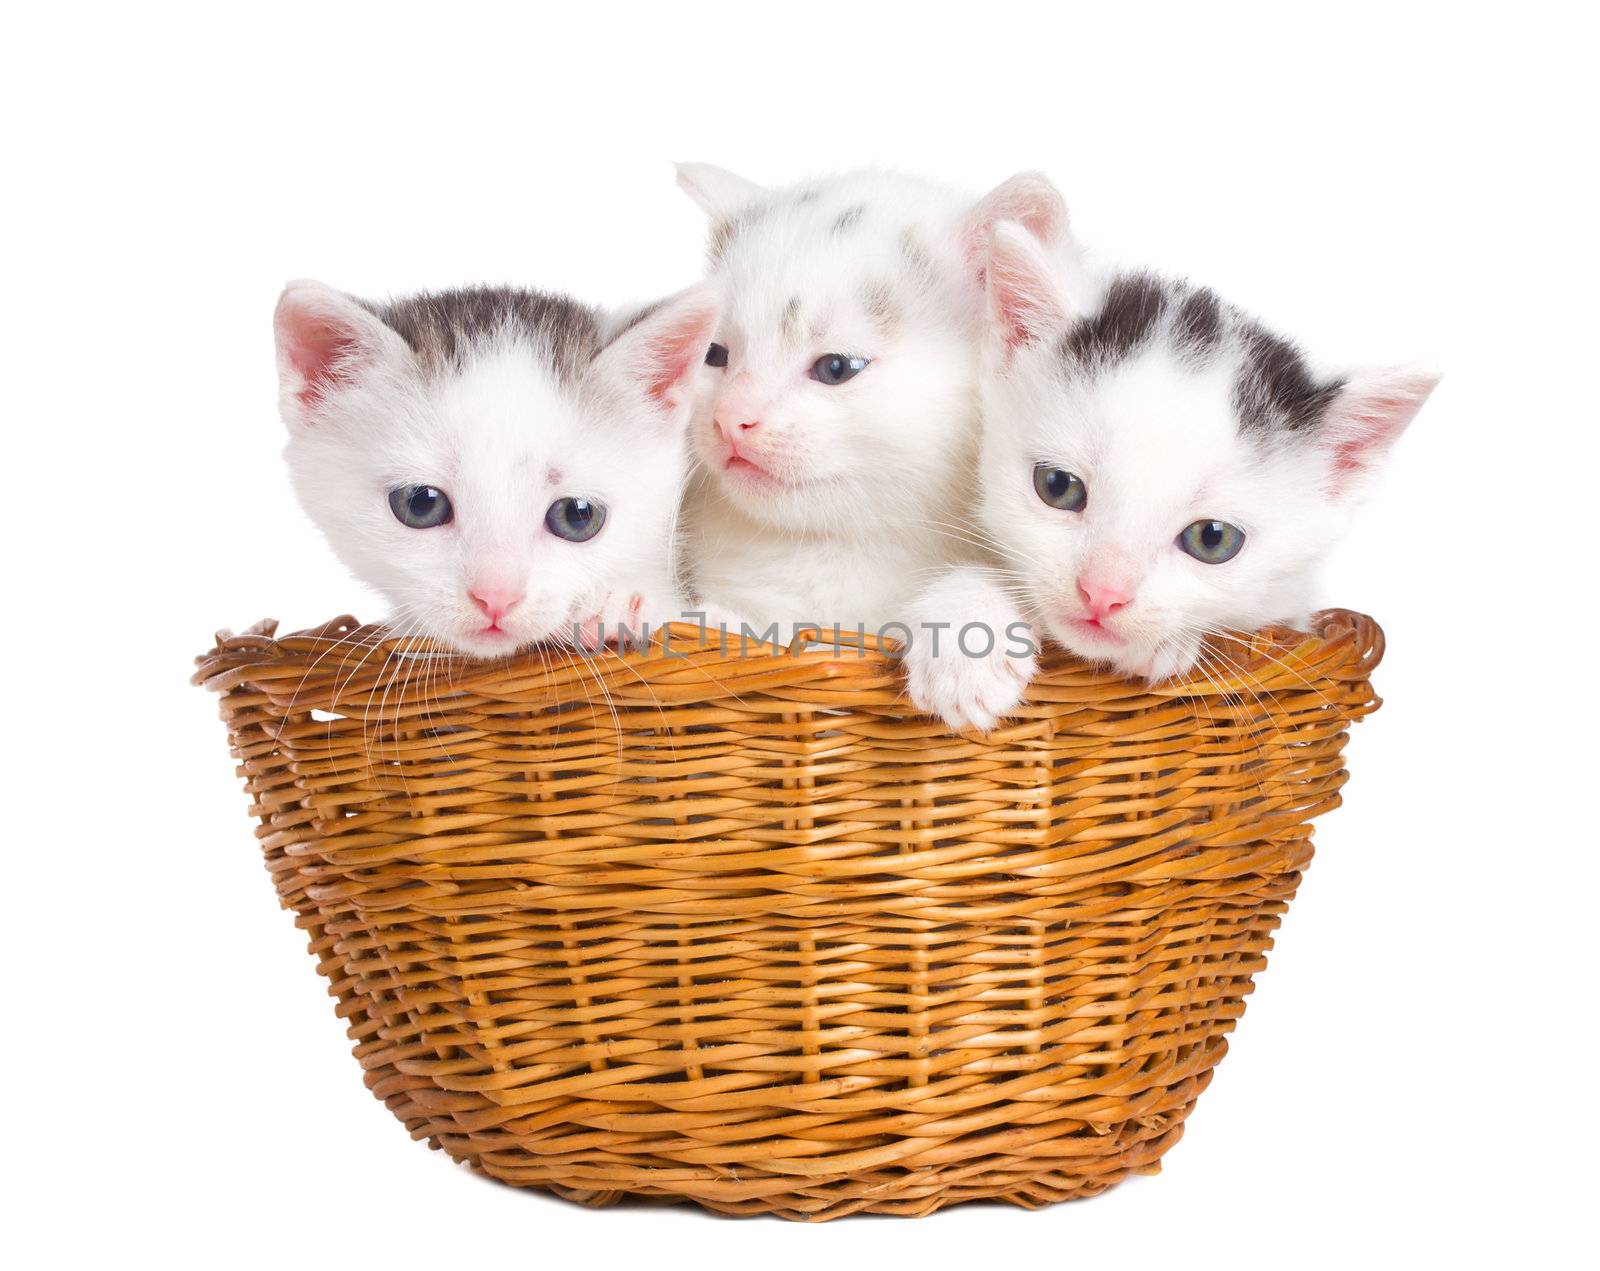 close-up three kittens sitting in basket, isolated on white